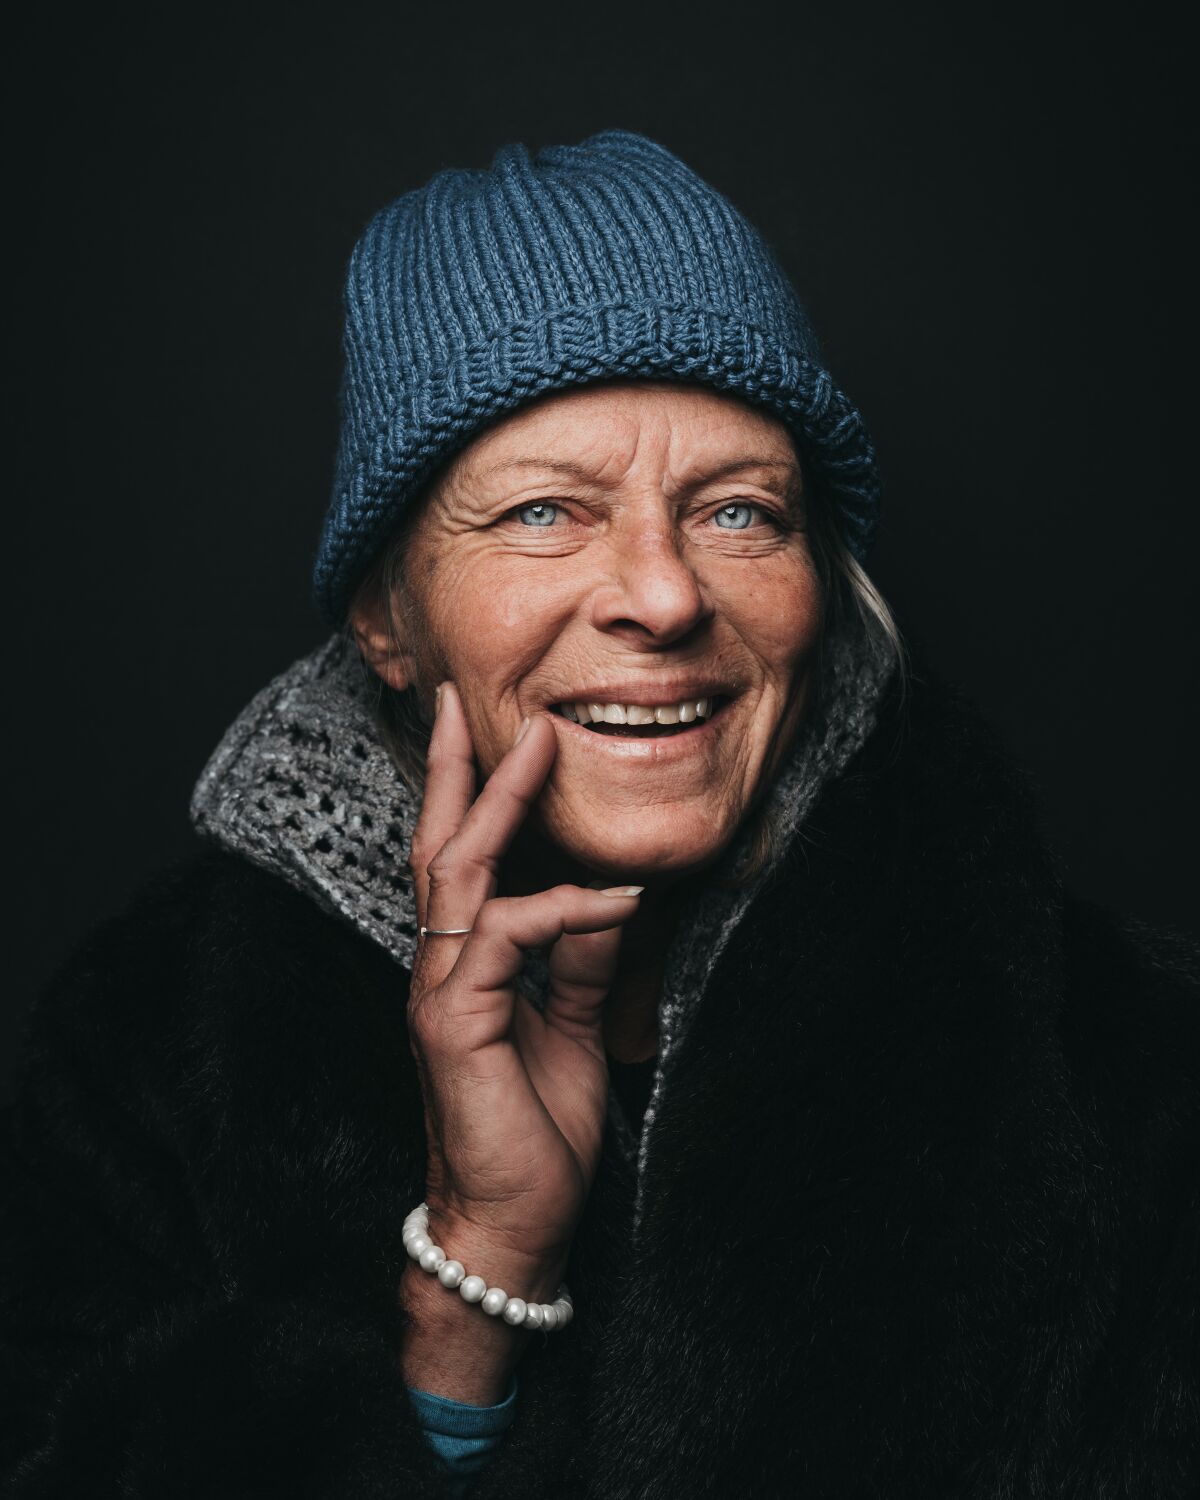 Jordan Verdin's photo of a woman named PJ is part of a La Jolla/Riford Library exhibit of portraits of homeless people.